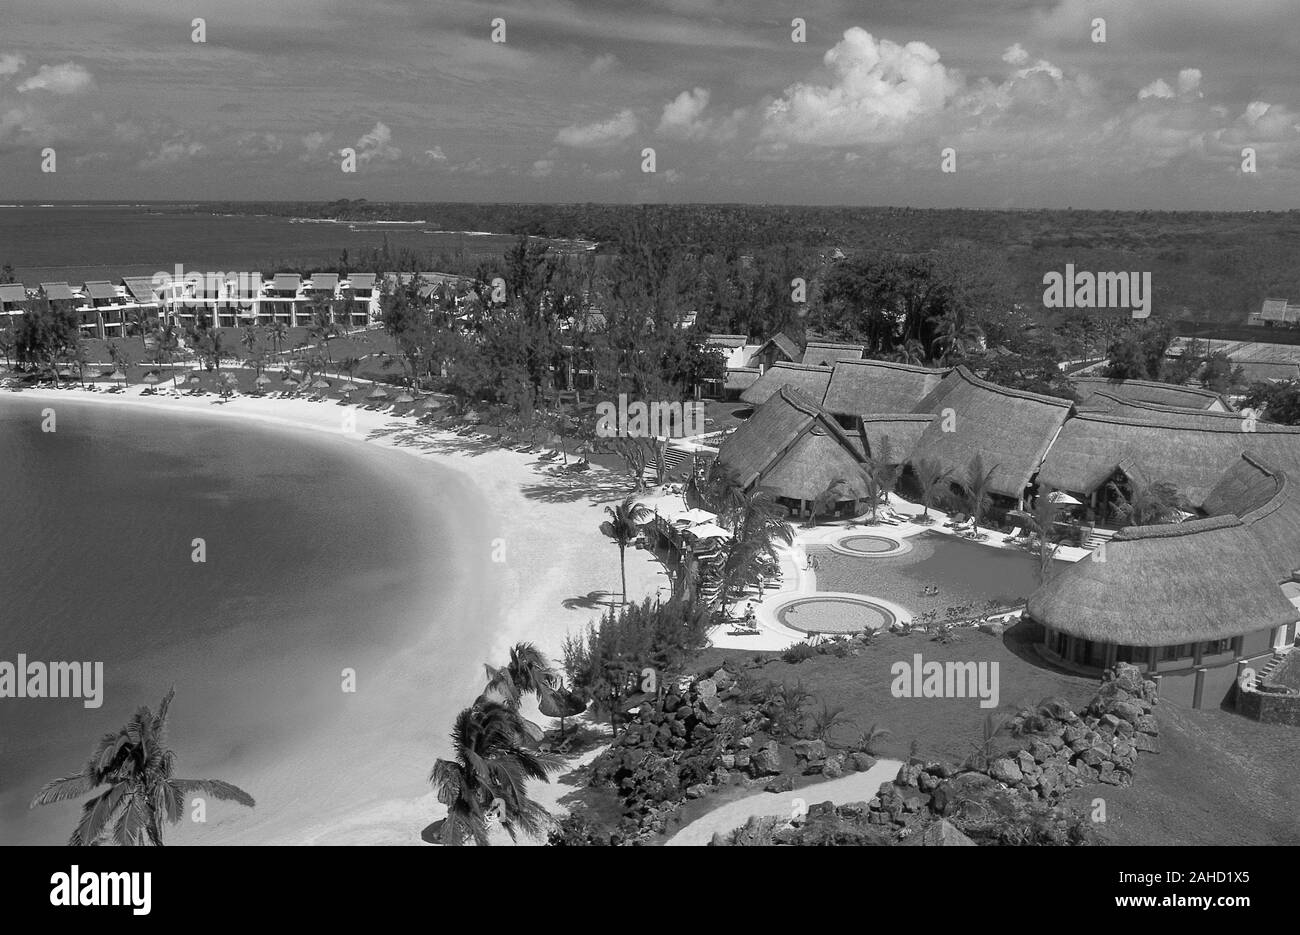 That's how paradies looks: Airshot of the 'Legend' luxury hotel on Mauritius Island Stock Photo